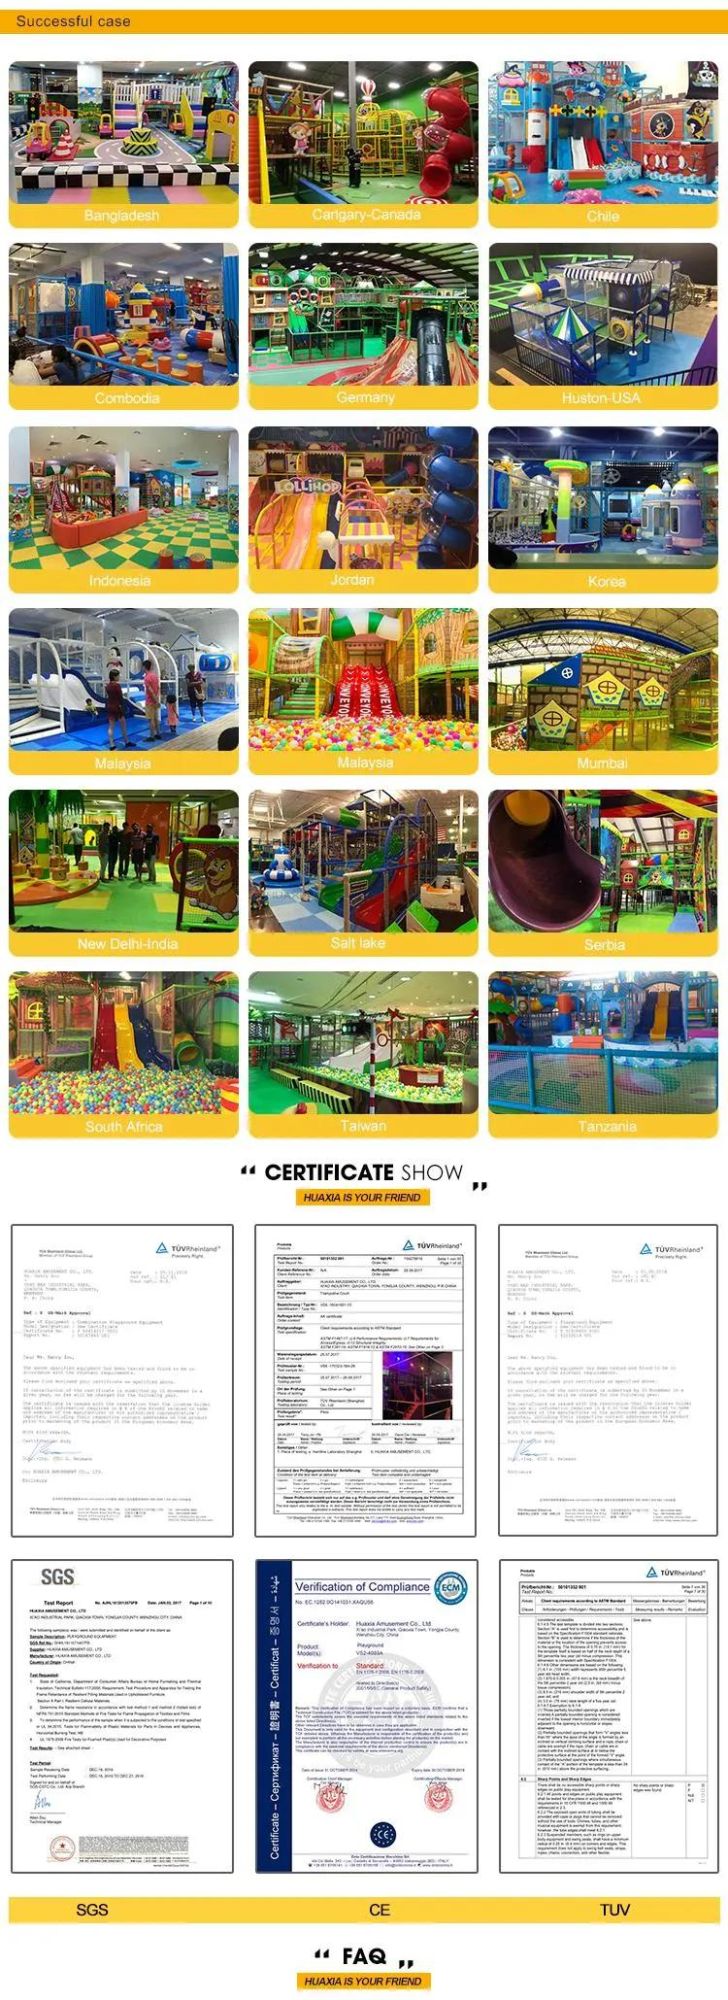 New Style Indoor Playground for Kids| (VS1-170219-376-30)